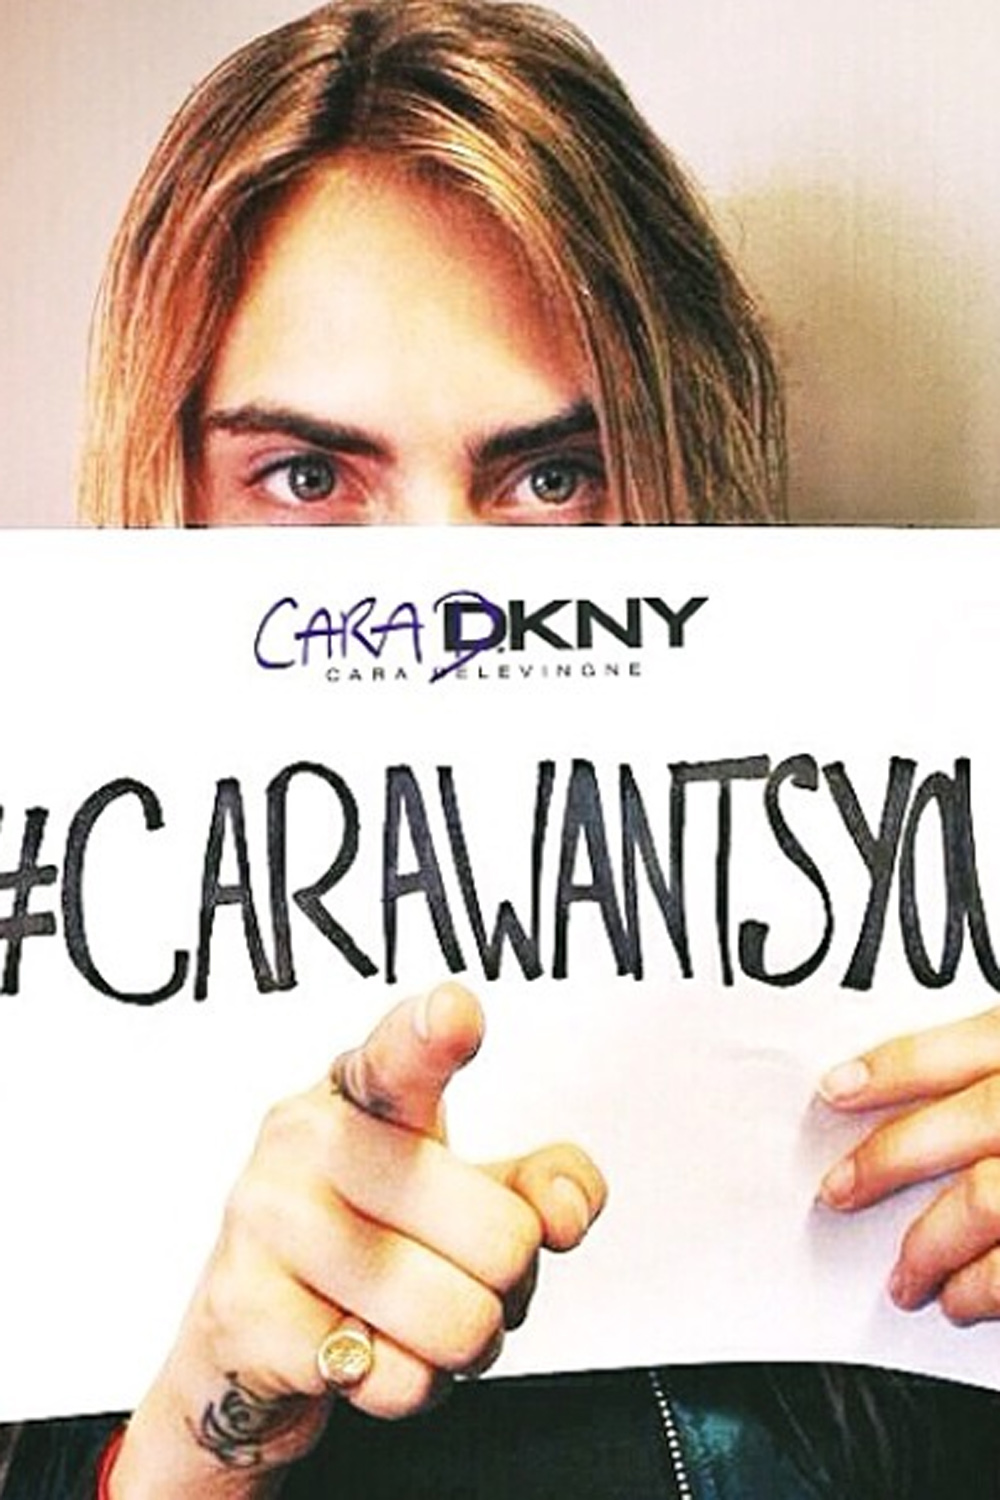 Cara Delevingne x DKNY collection in pictures